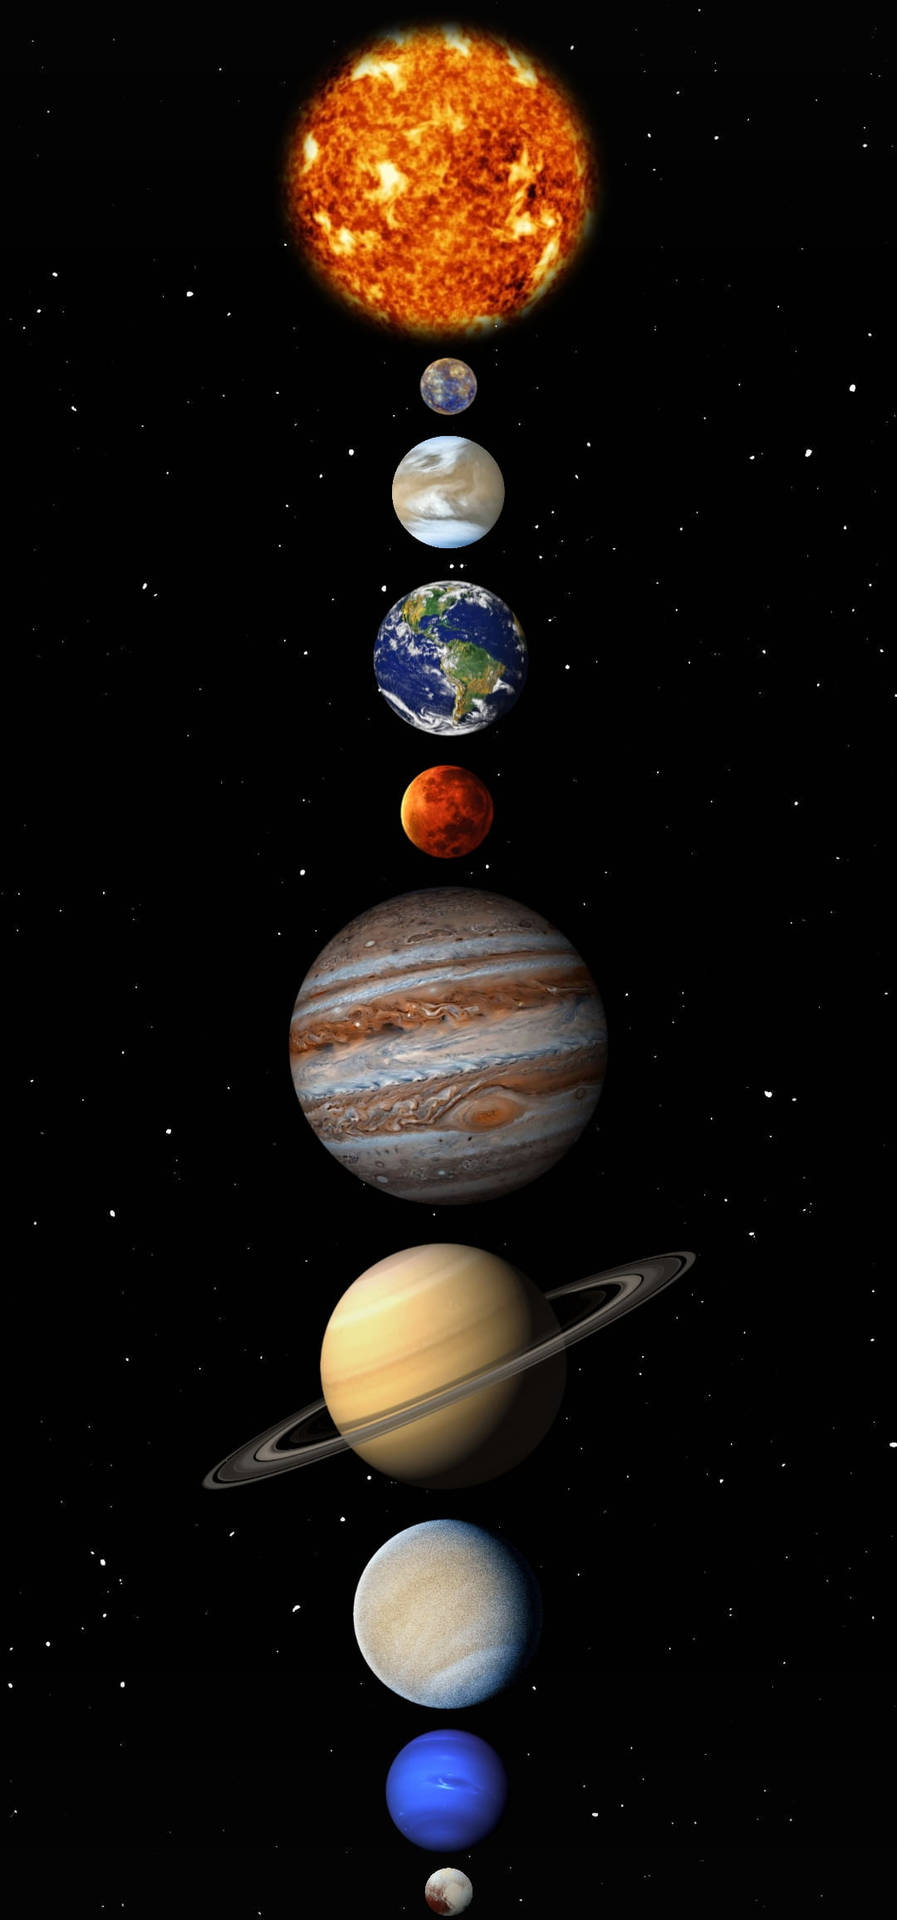 Caption: Stunning Hd View Of The Solar System